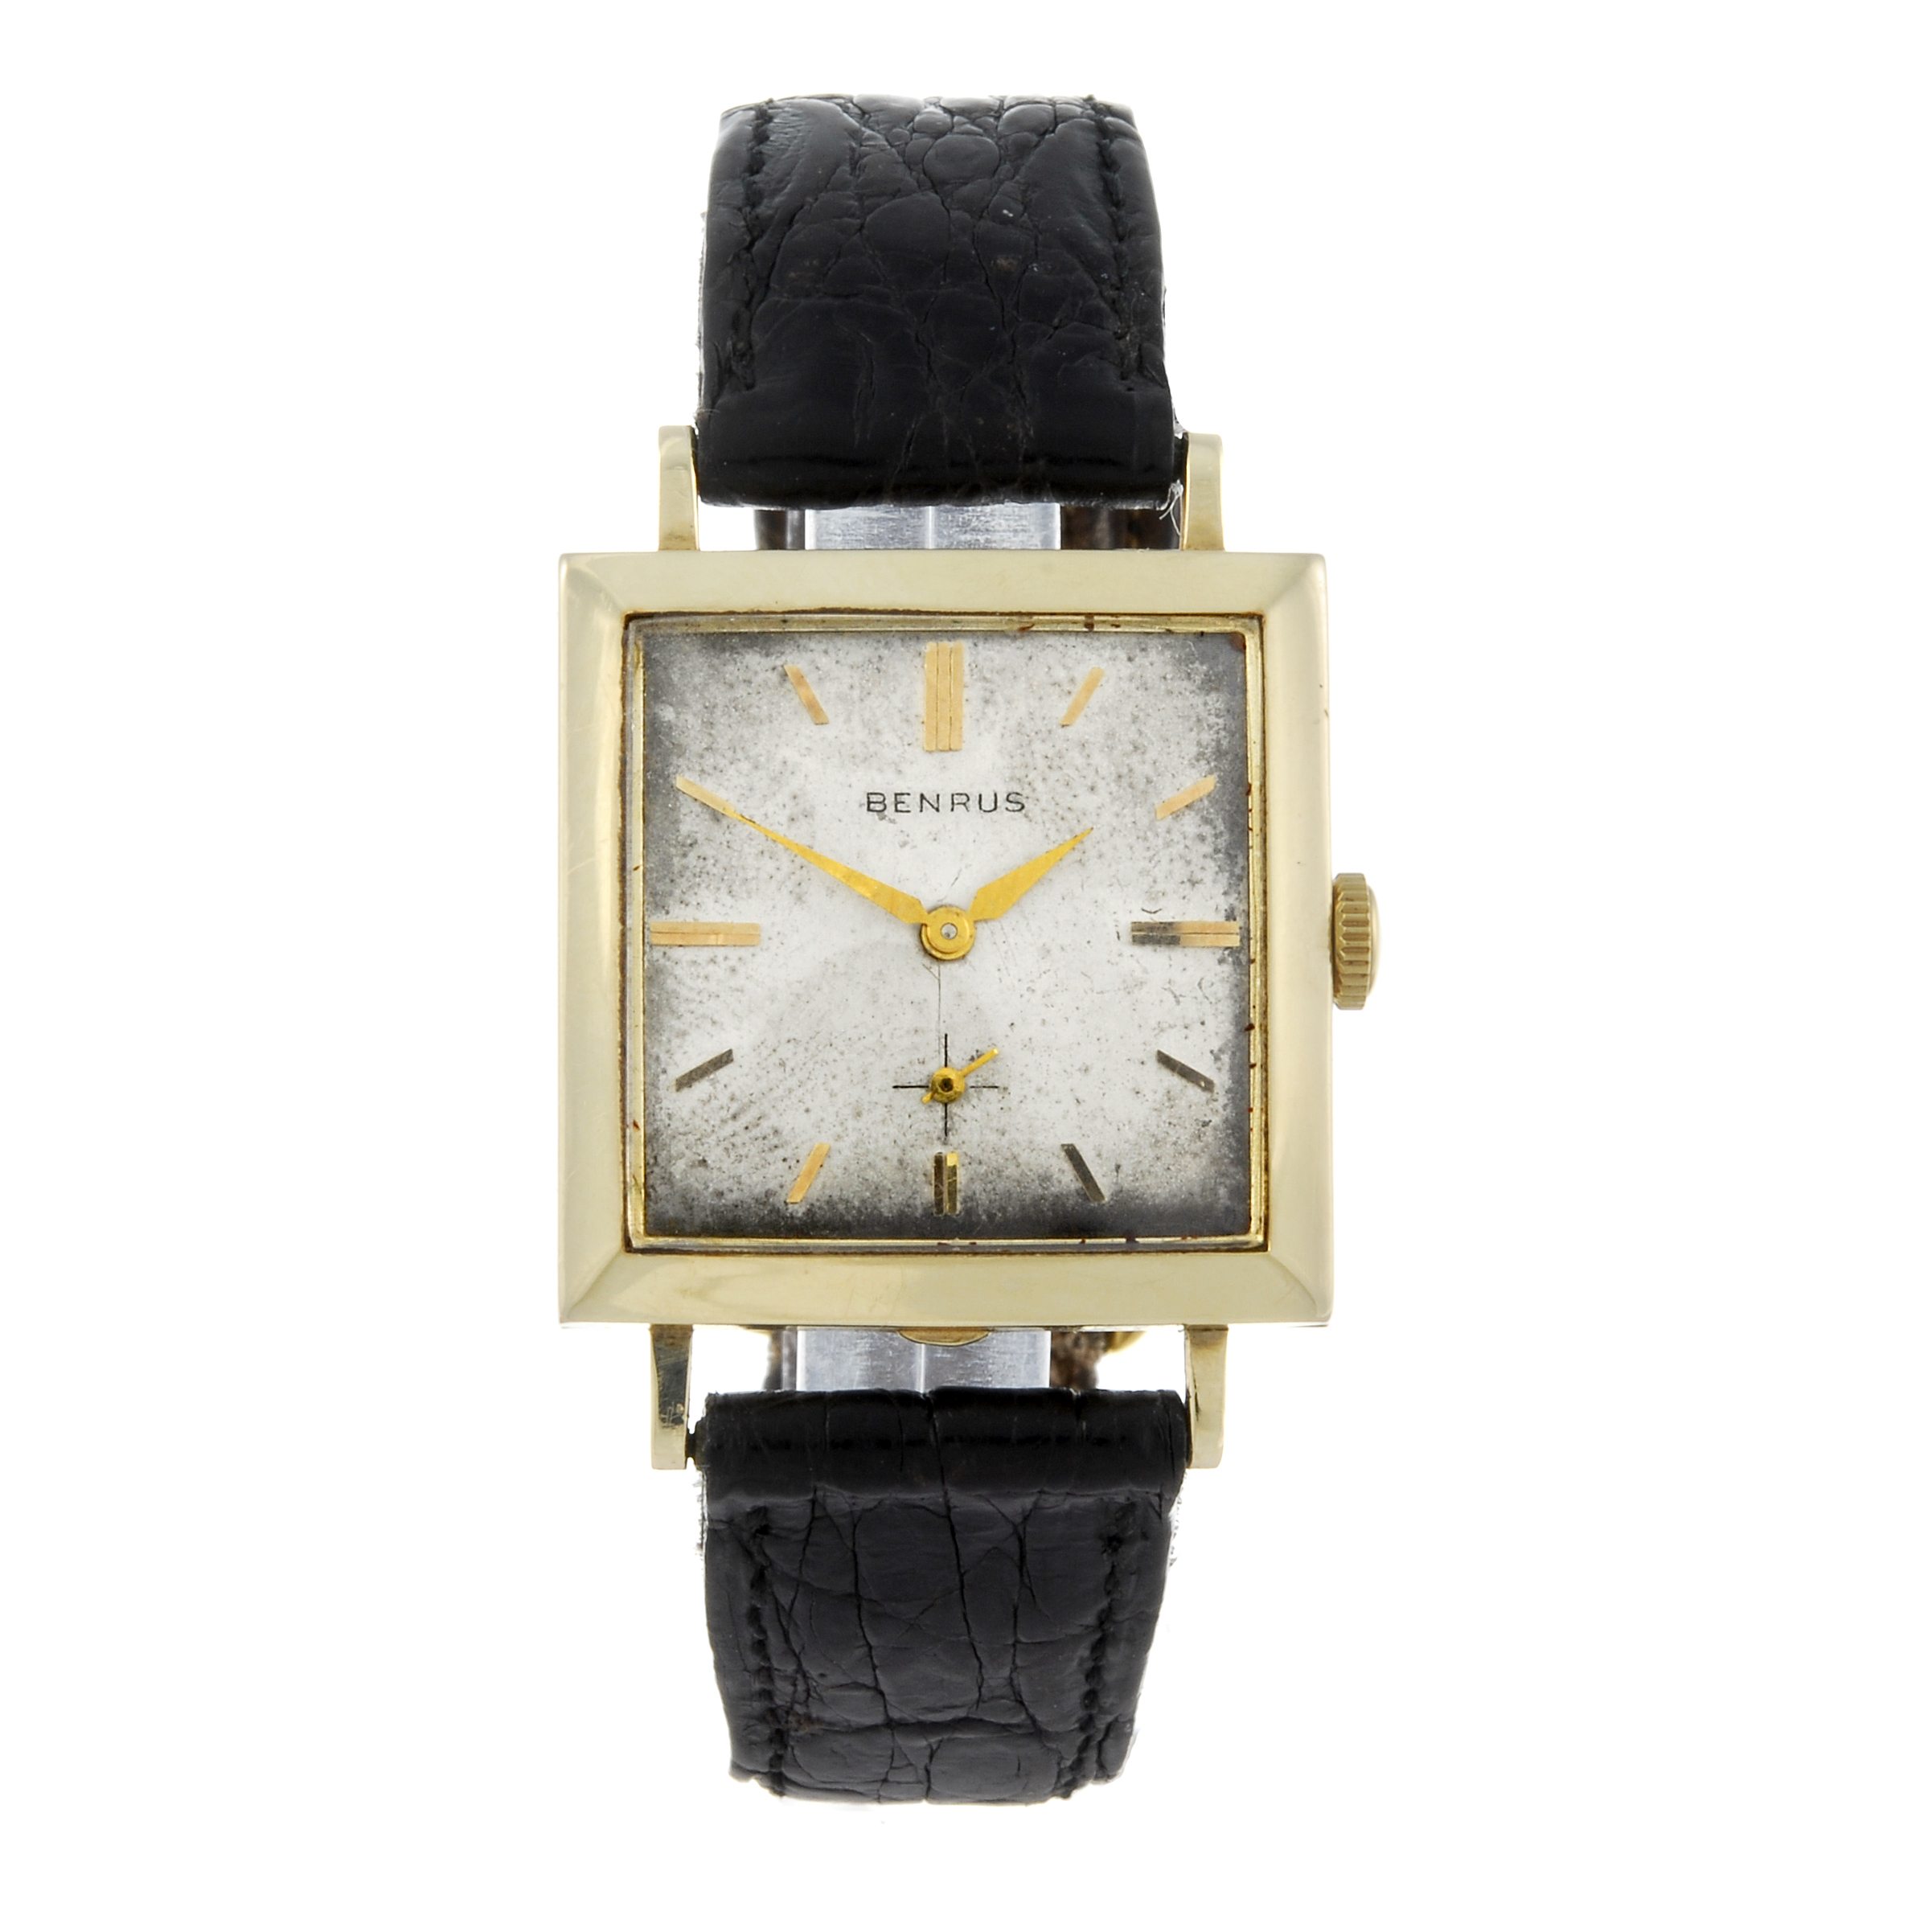 BENRUS - a gentleman's wrist watch. Yellow metal case, stamped 14K. Numbered C04171. Signed manual